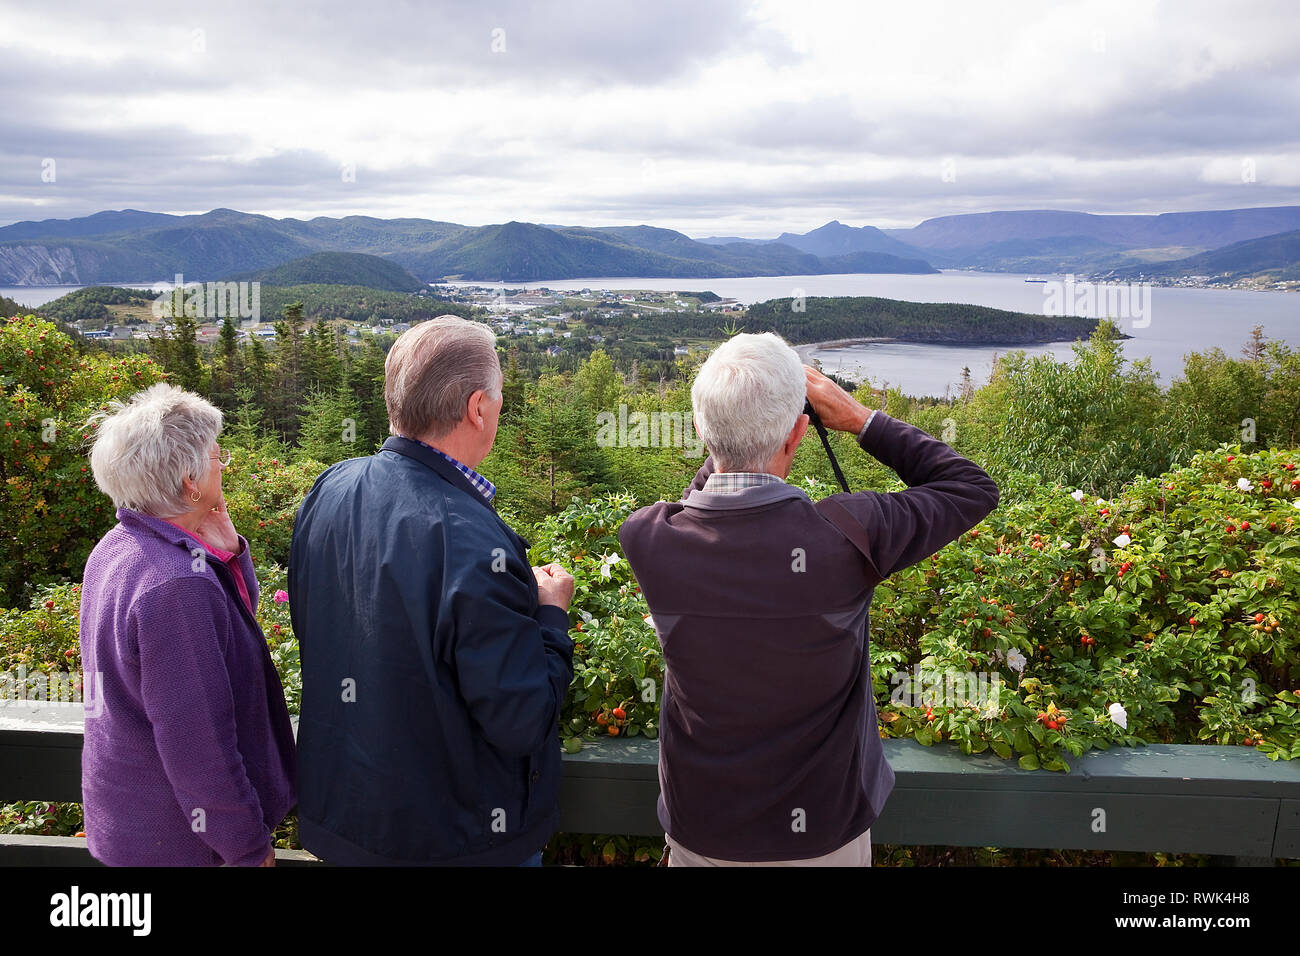 Three mature adults admiring the view from a lookout located at Jenniex Heritage House in Norris Point. In view encompasses the town of Norris Point, Bonne Bay and Gros Morne National Park, Western Newfoundland, Canada Stock Photo